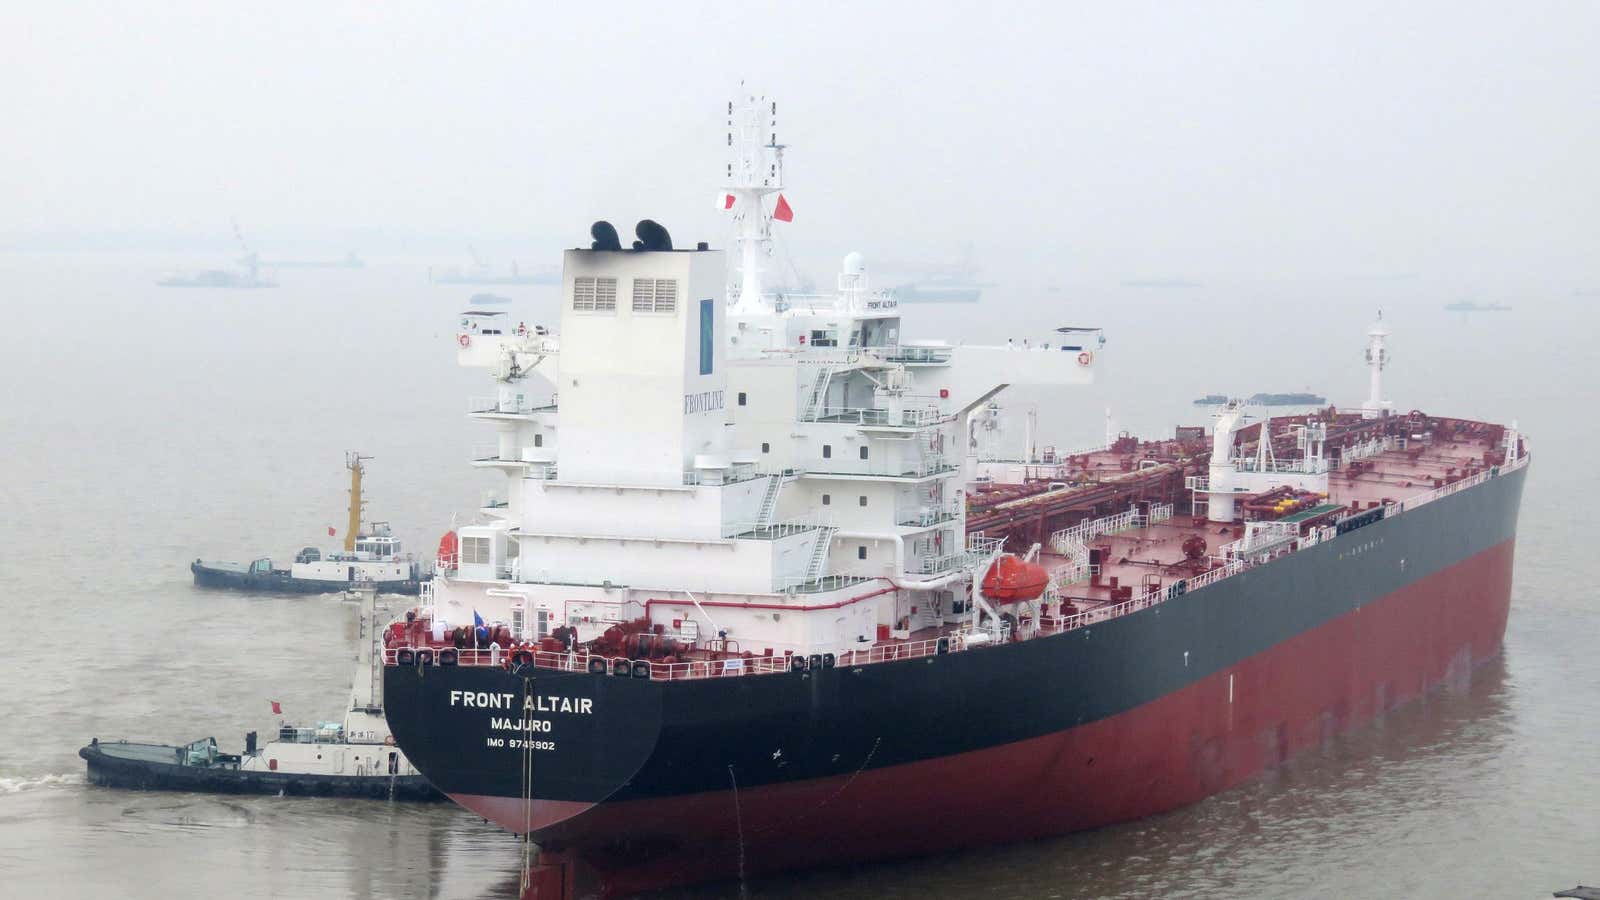 The crude oil tanker Front Altair.